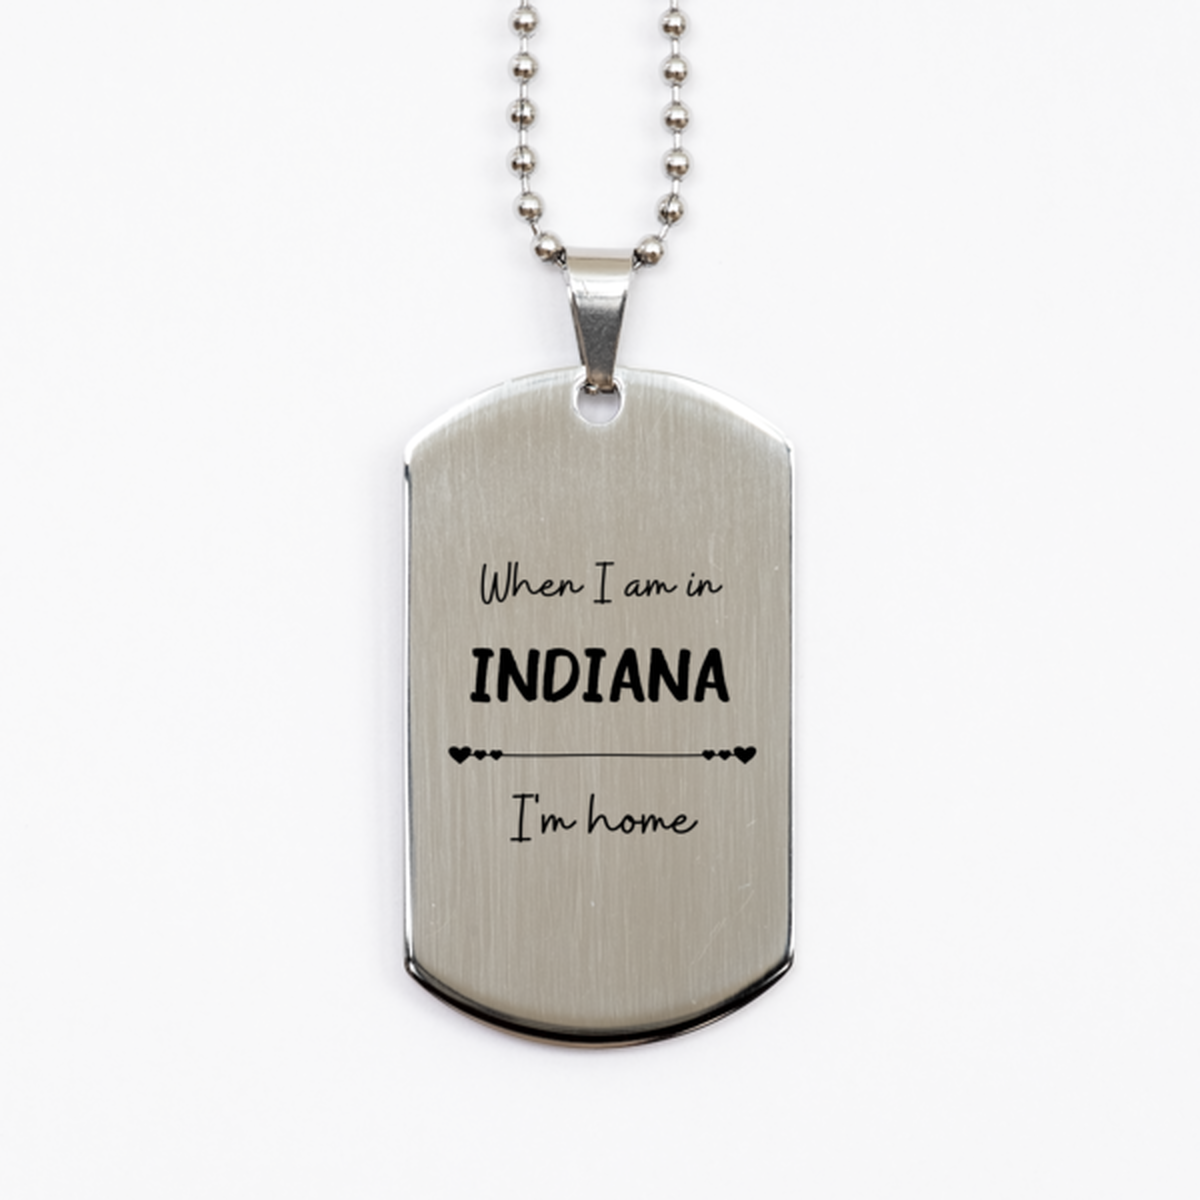 When I am in Indiana I'm home Silver Dog Tag, Cheap Gifts For Indiana, State Indiana Birthday Gifts for Friends Coworker